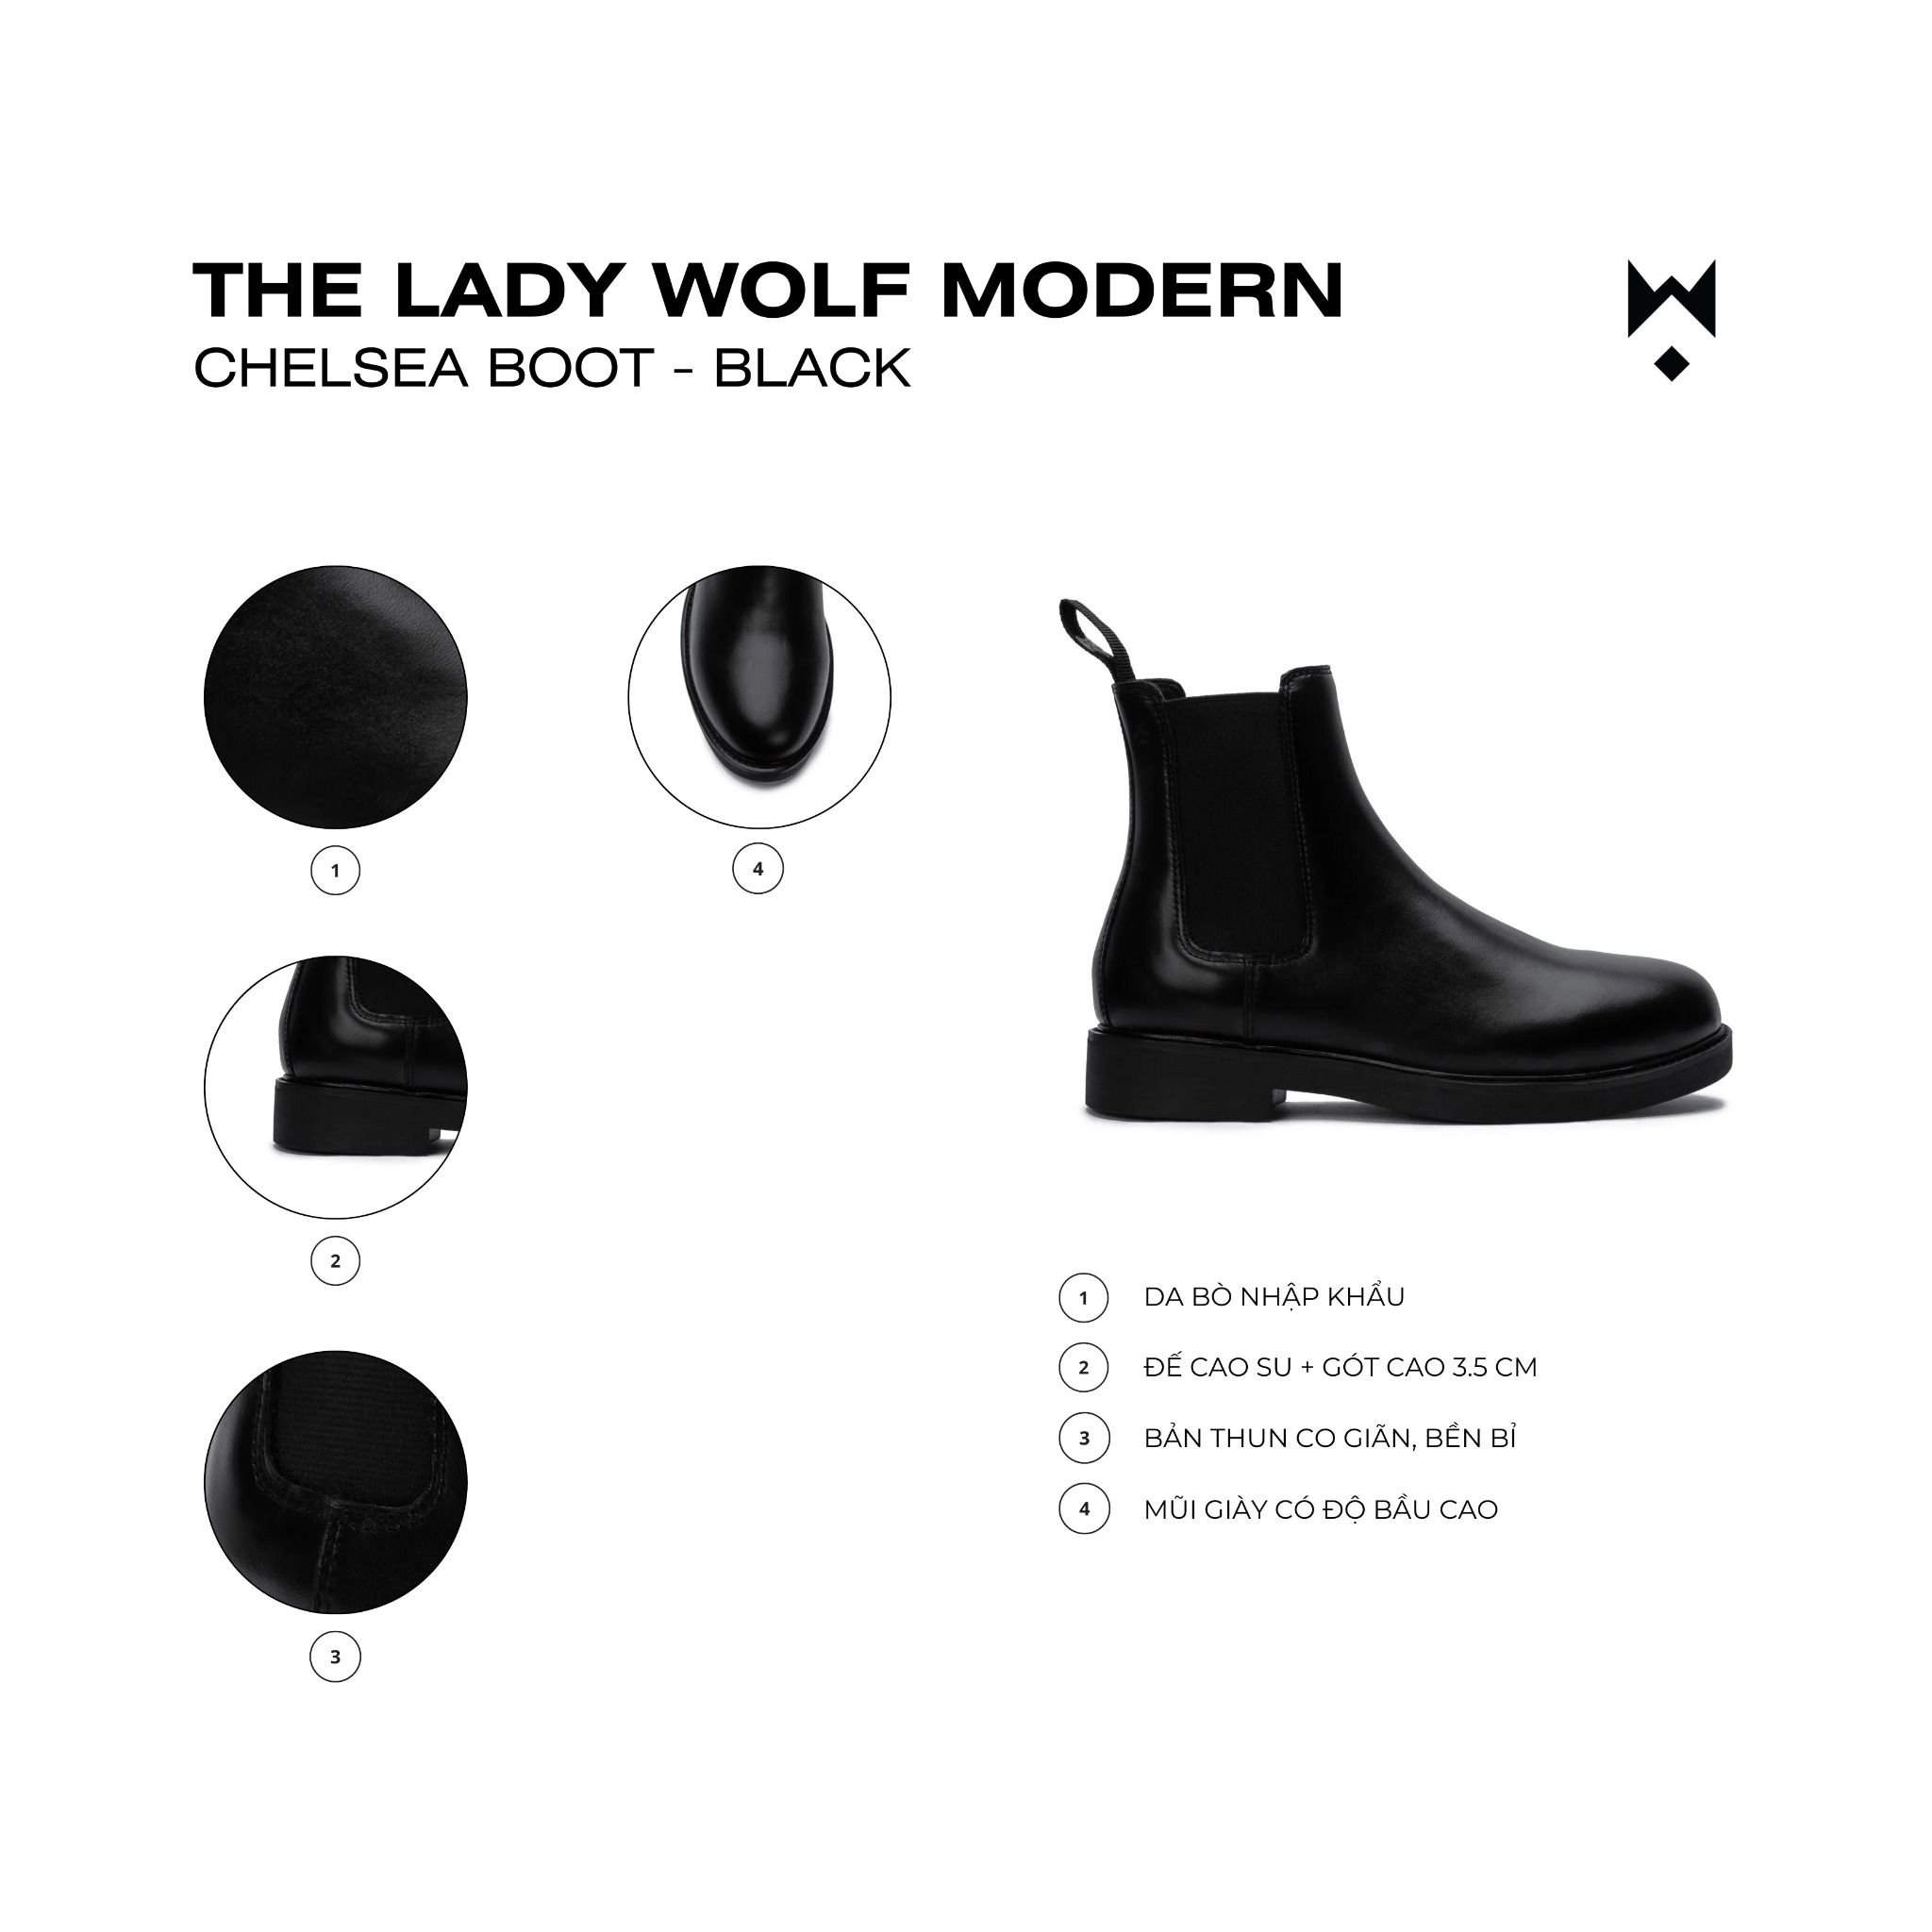  THE LADY WOLF MODERN CHELSEA BOOT - BLACK 